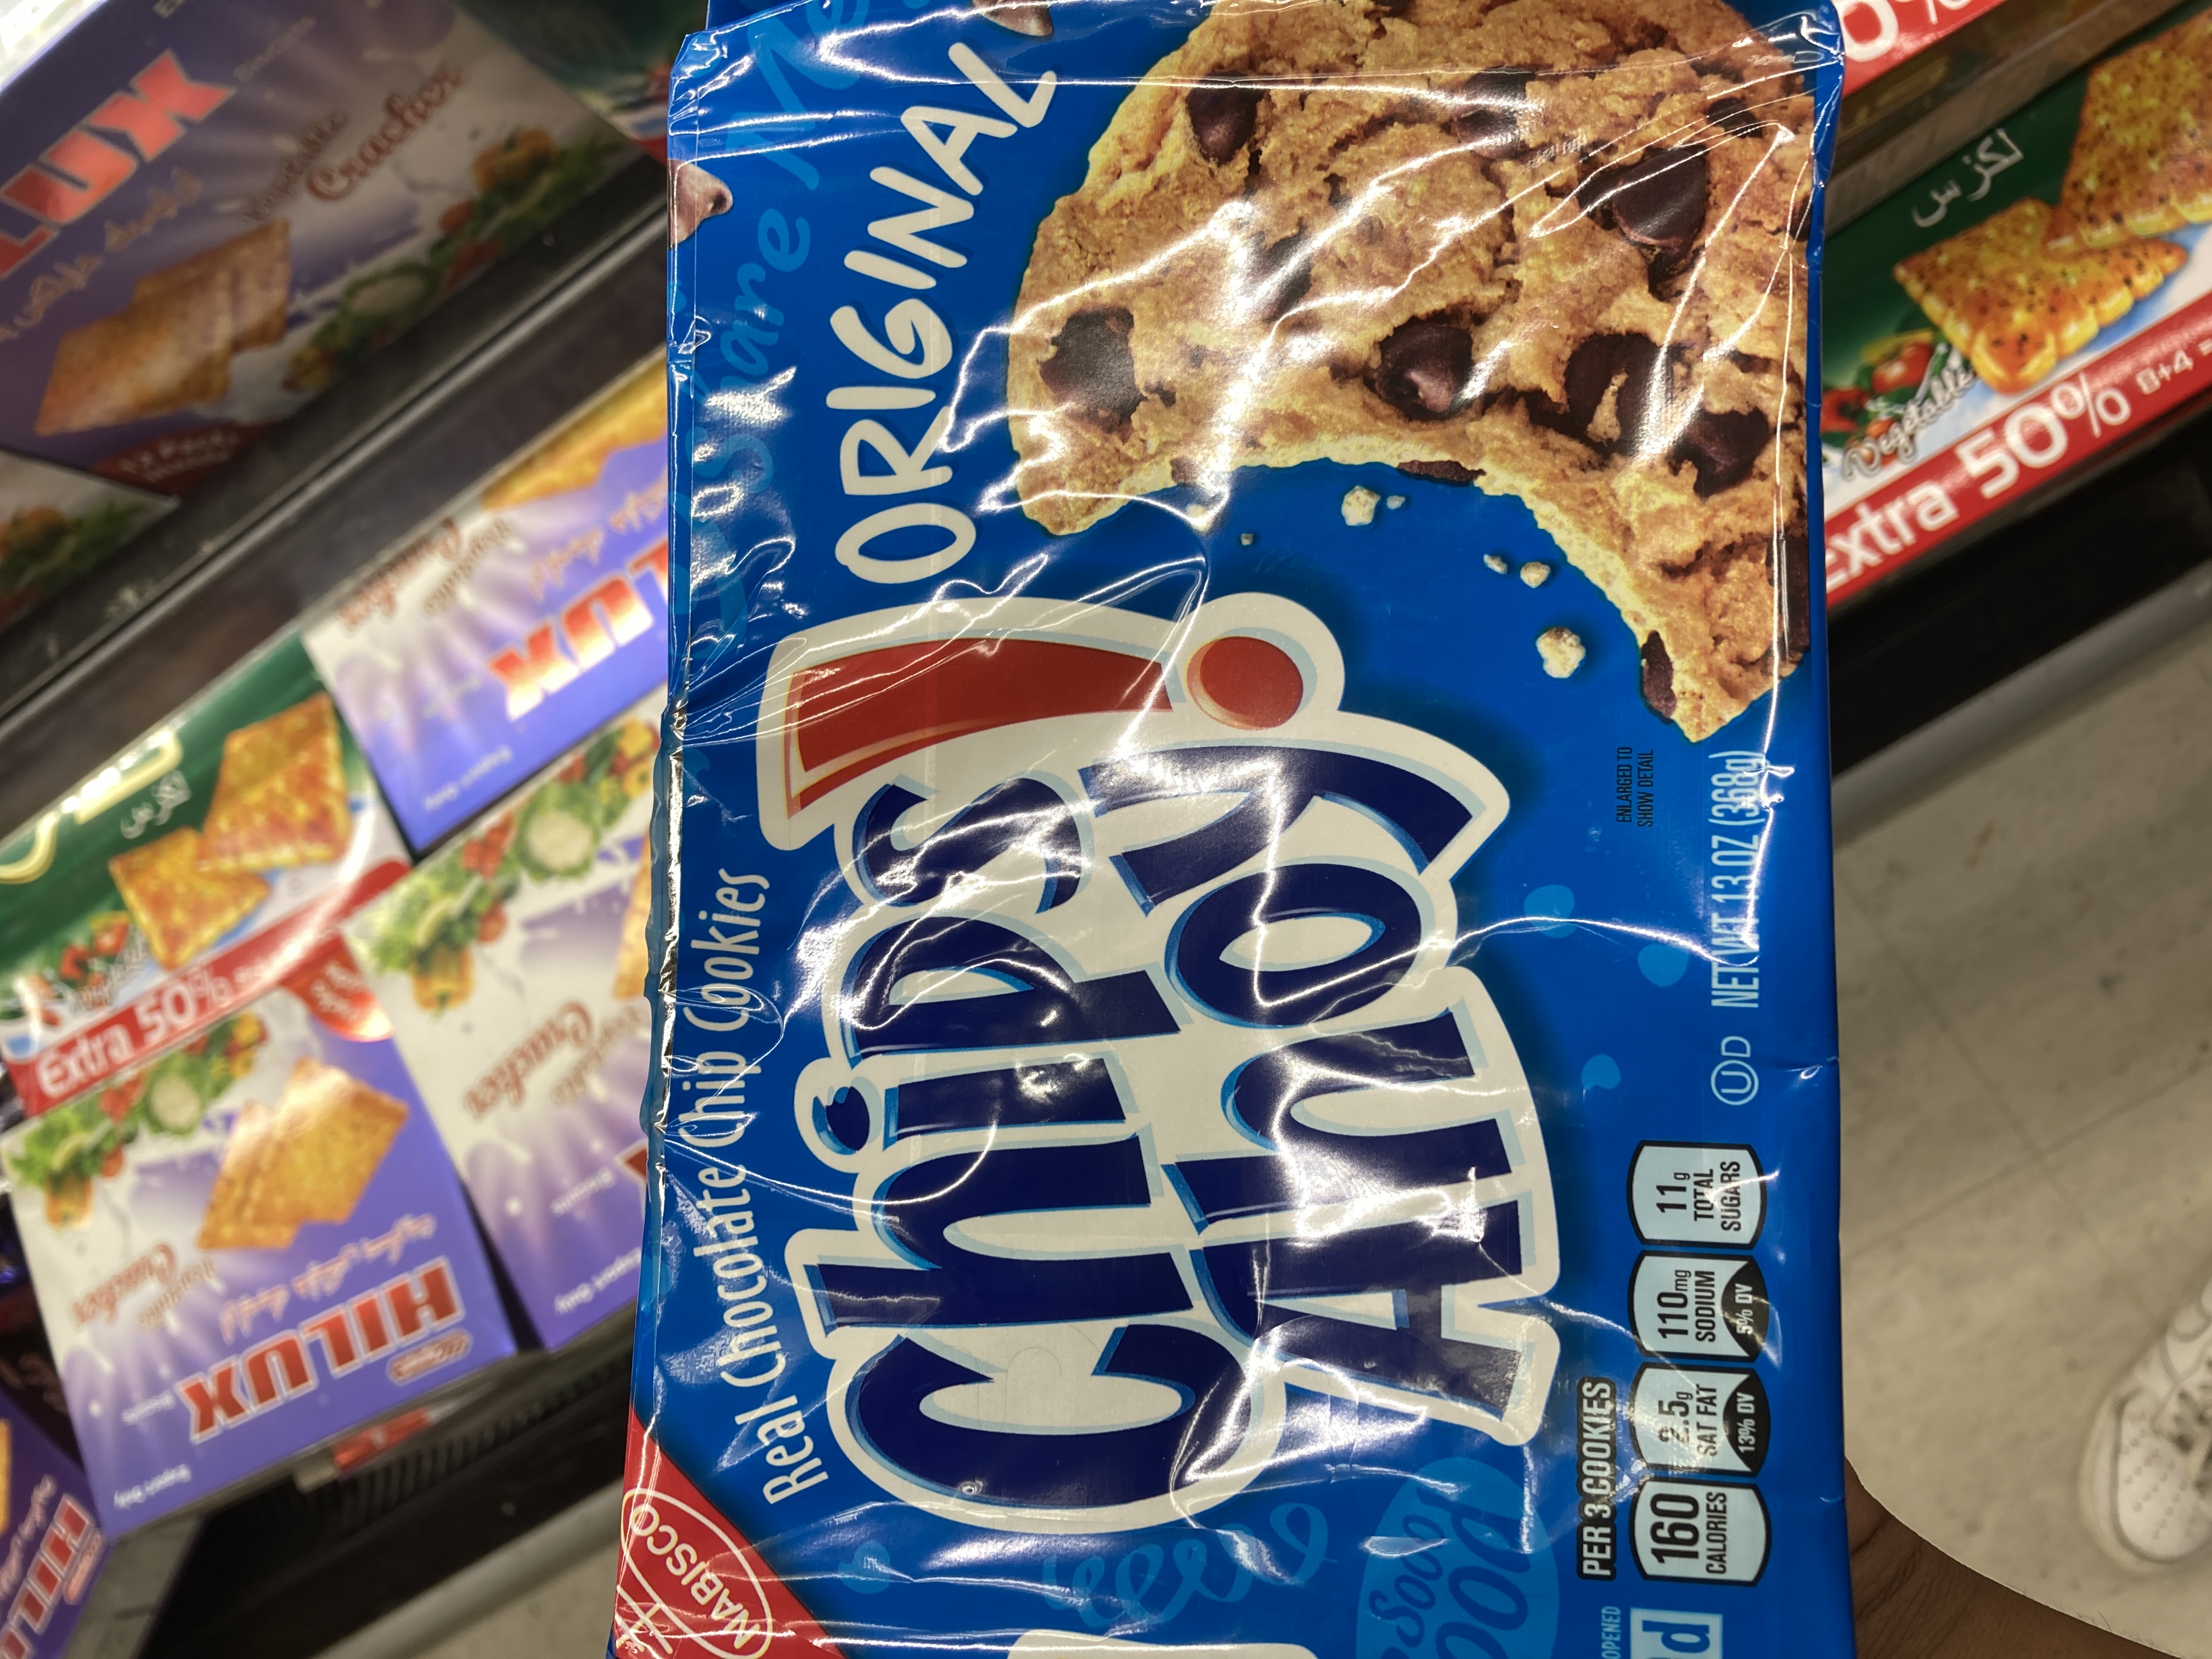 CHIPS AHOY CHOCOLATE CHIP COOKIES ORIGINAL